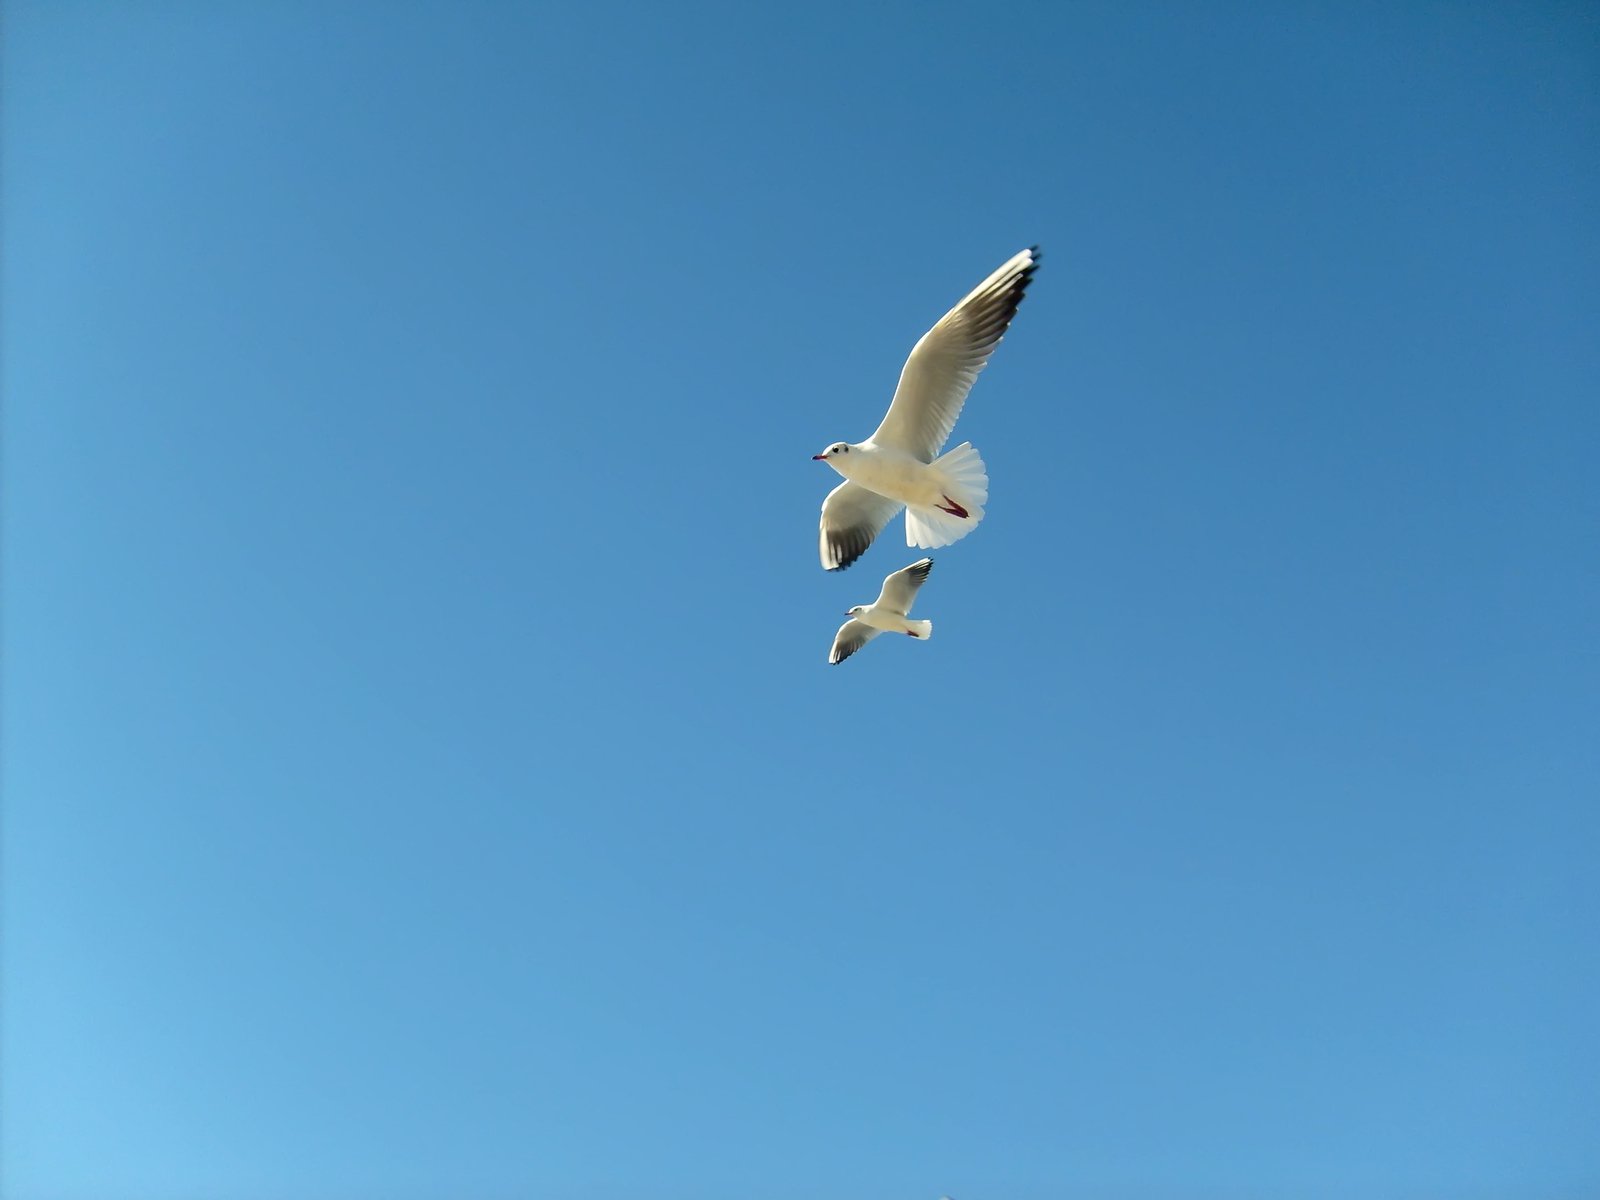 two birds flying in a clear blue sky